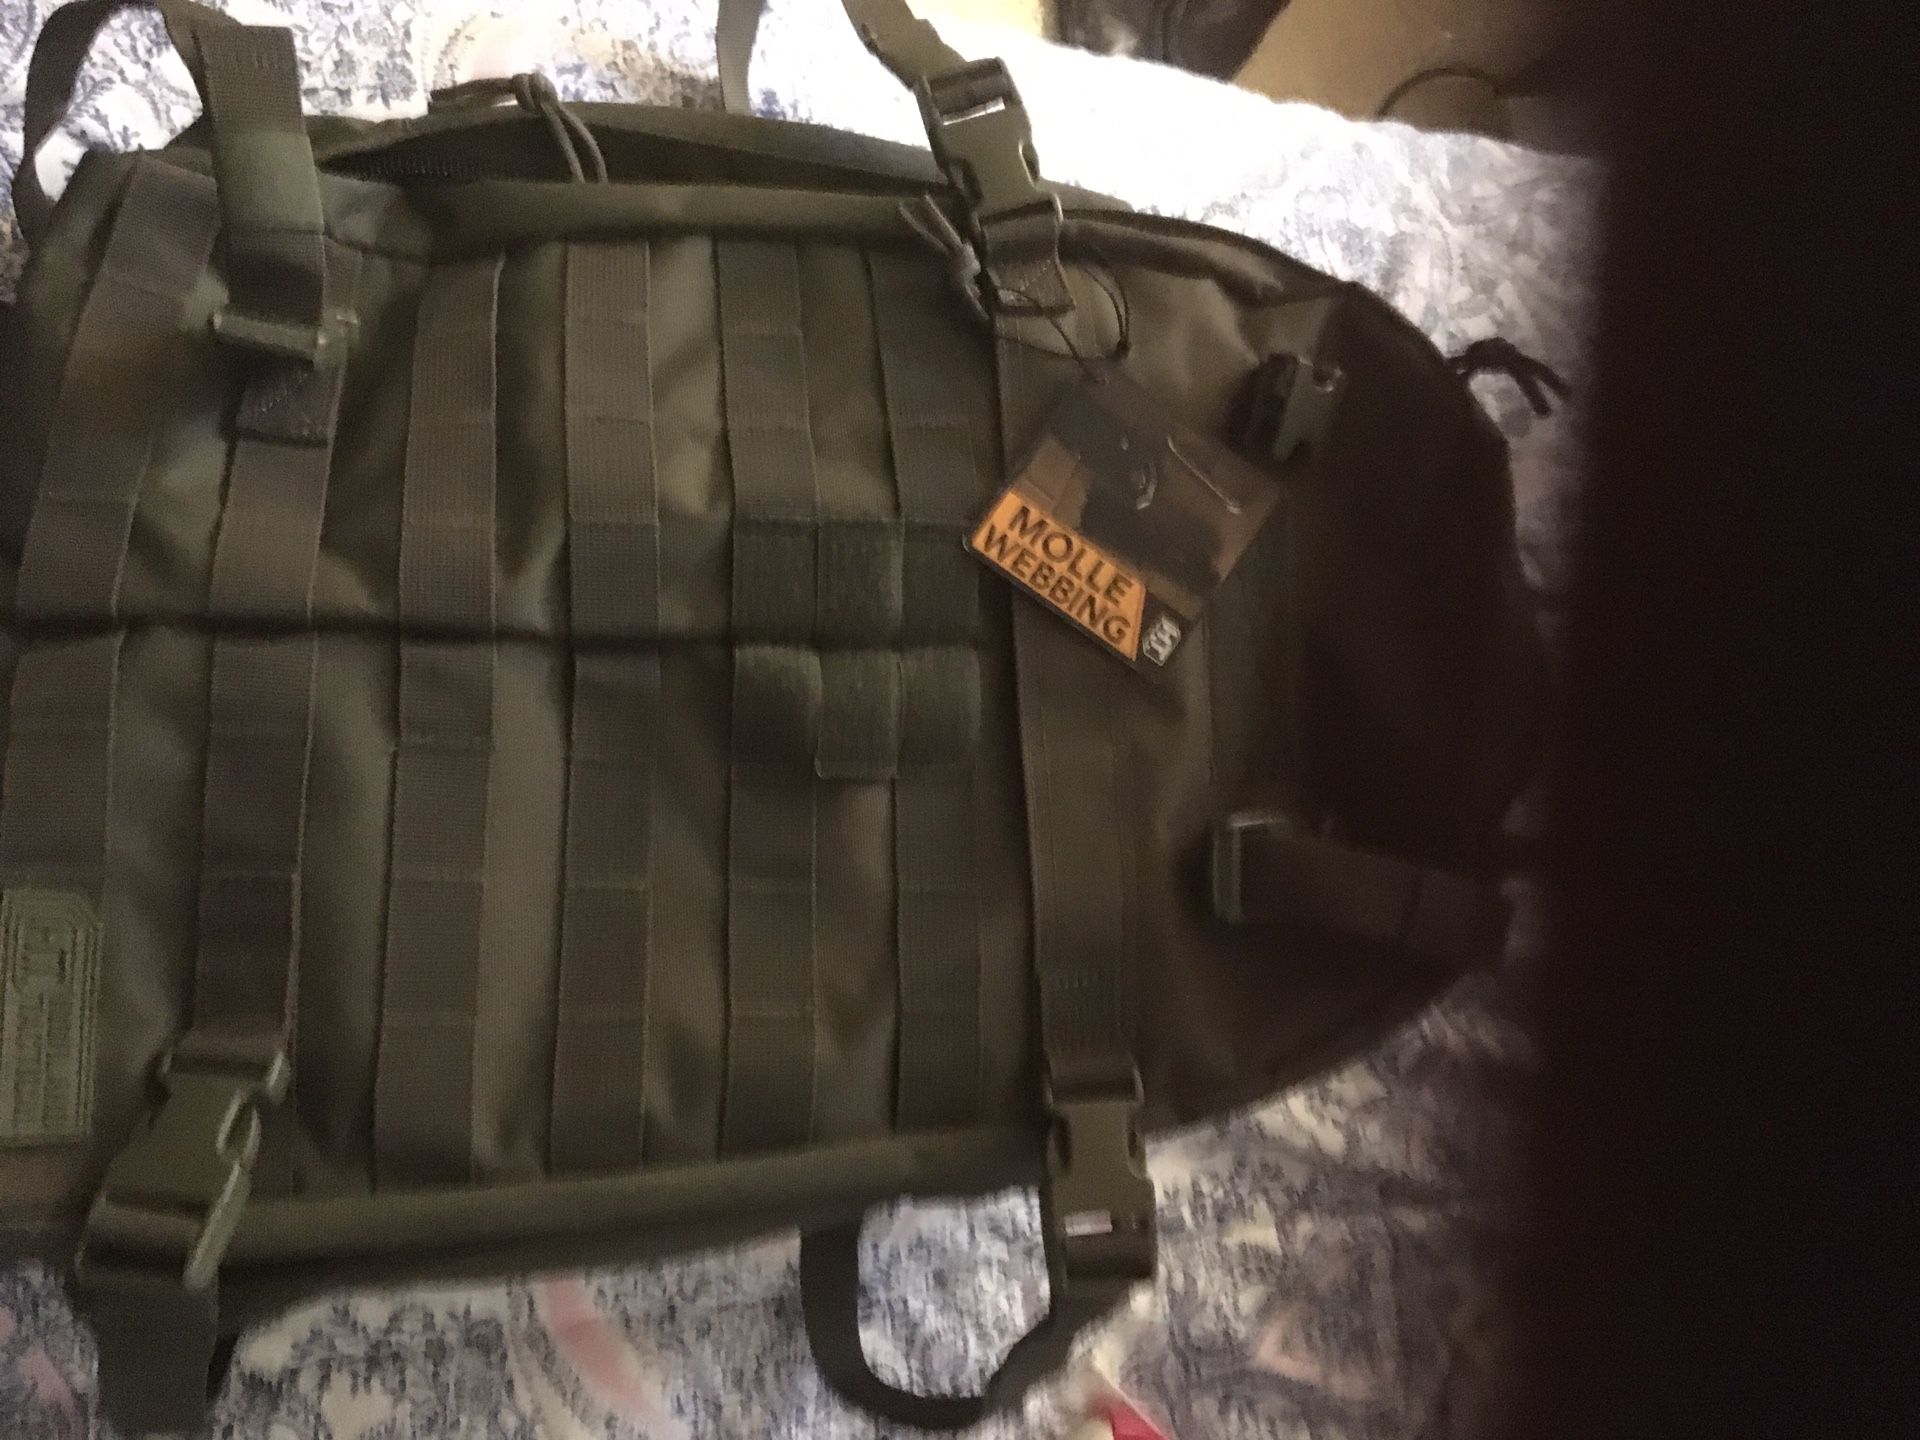 Army style backpack new never used reduced for quick sale